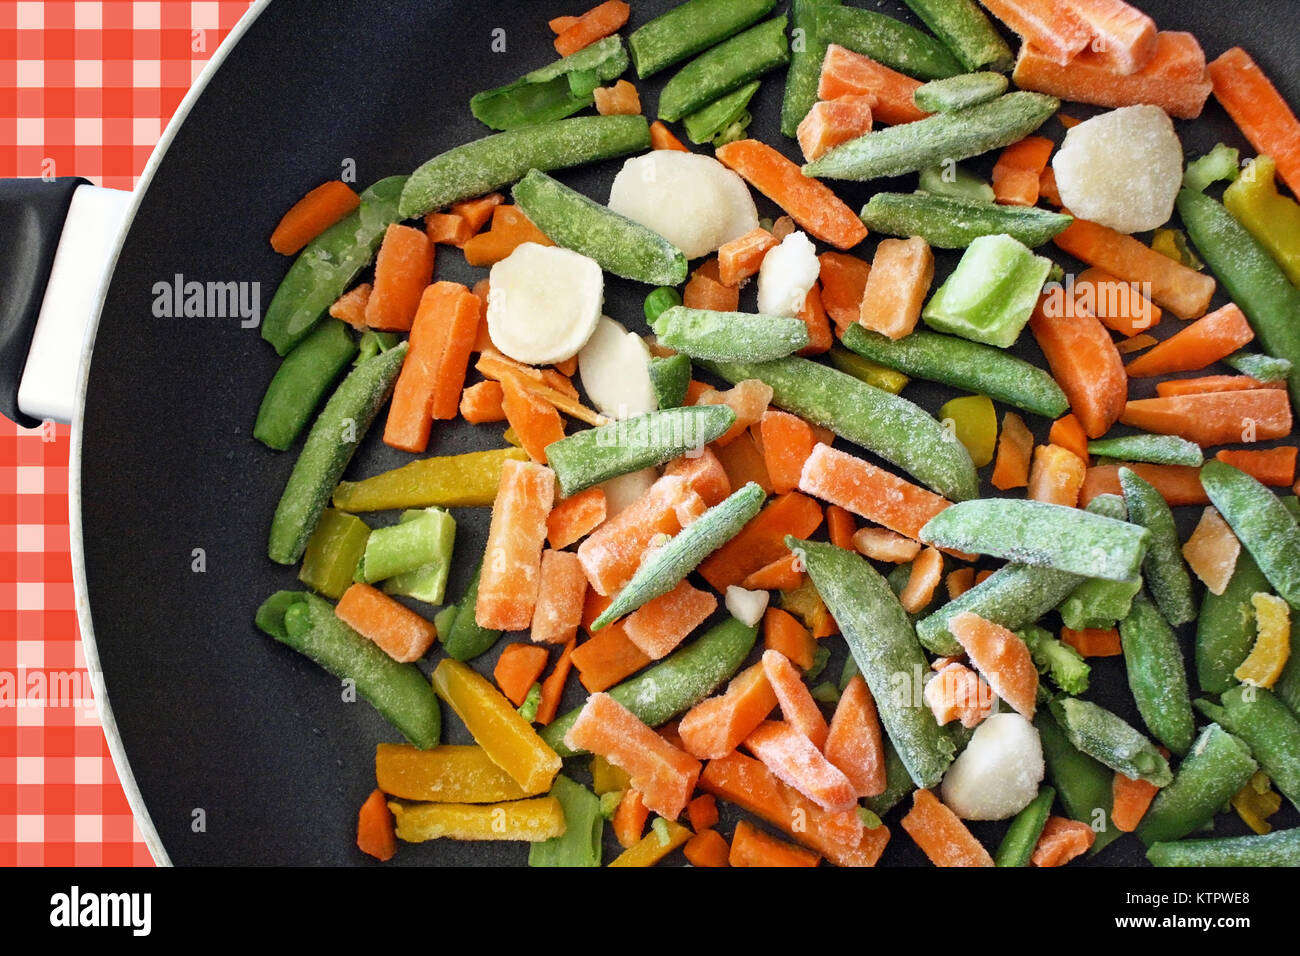 A mixture of assorted frozen veggies in skillet ready for cooking Stock Photo